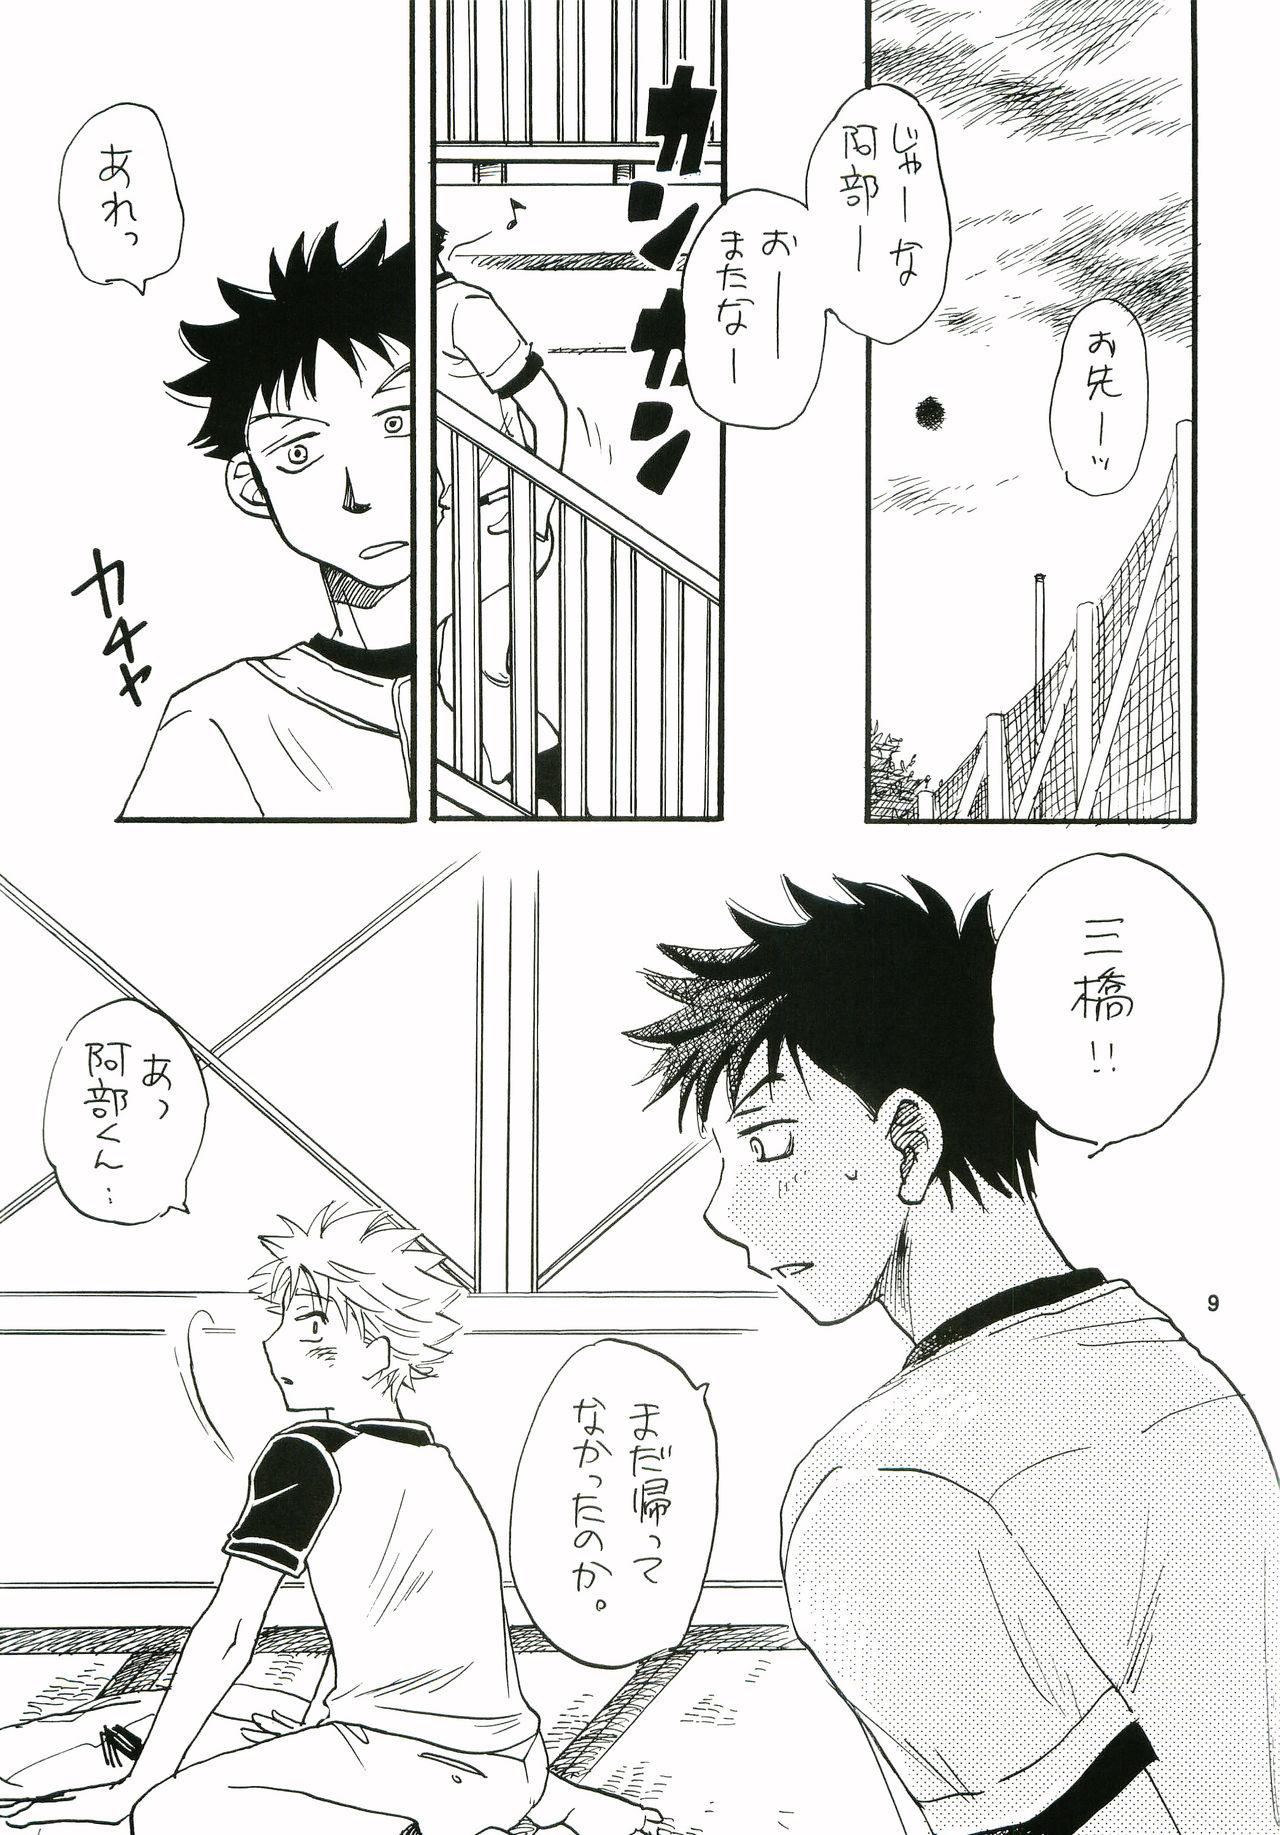 Blowing Honto no Ace Number o Kimi ni. - Ookiku furikabutte Muscle - Page 8